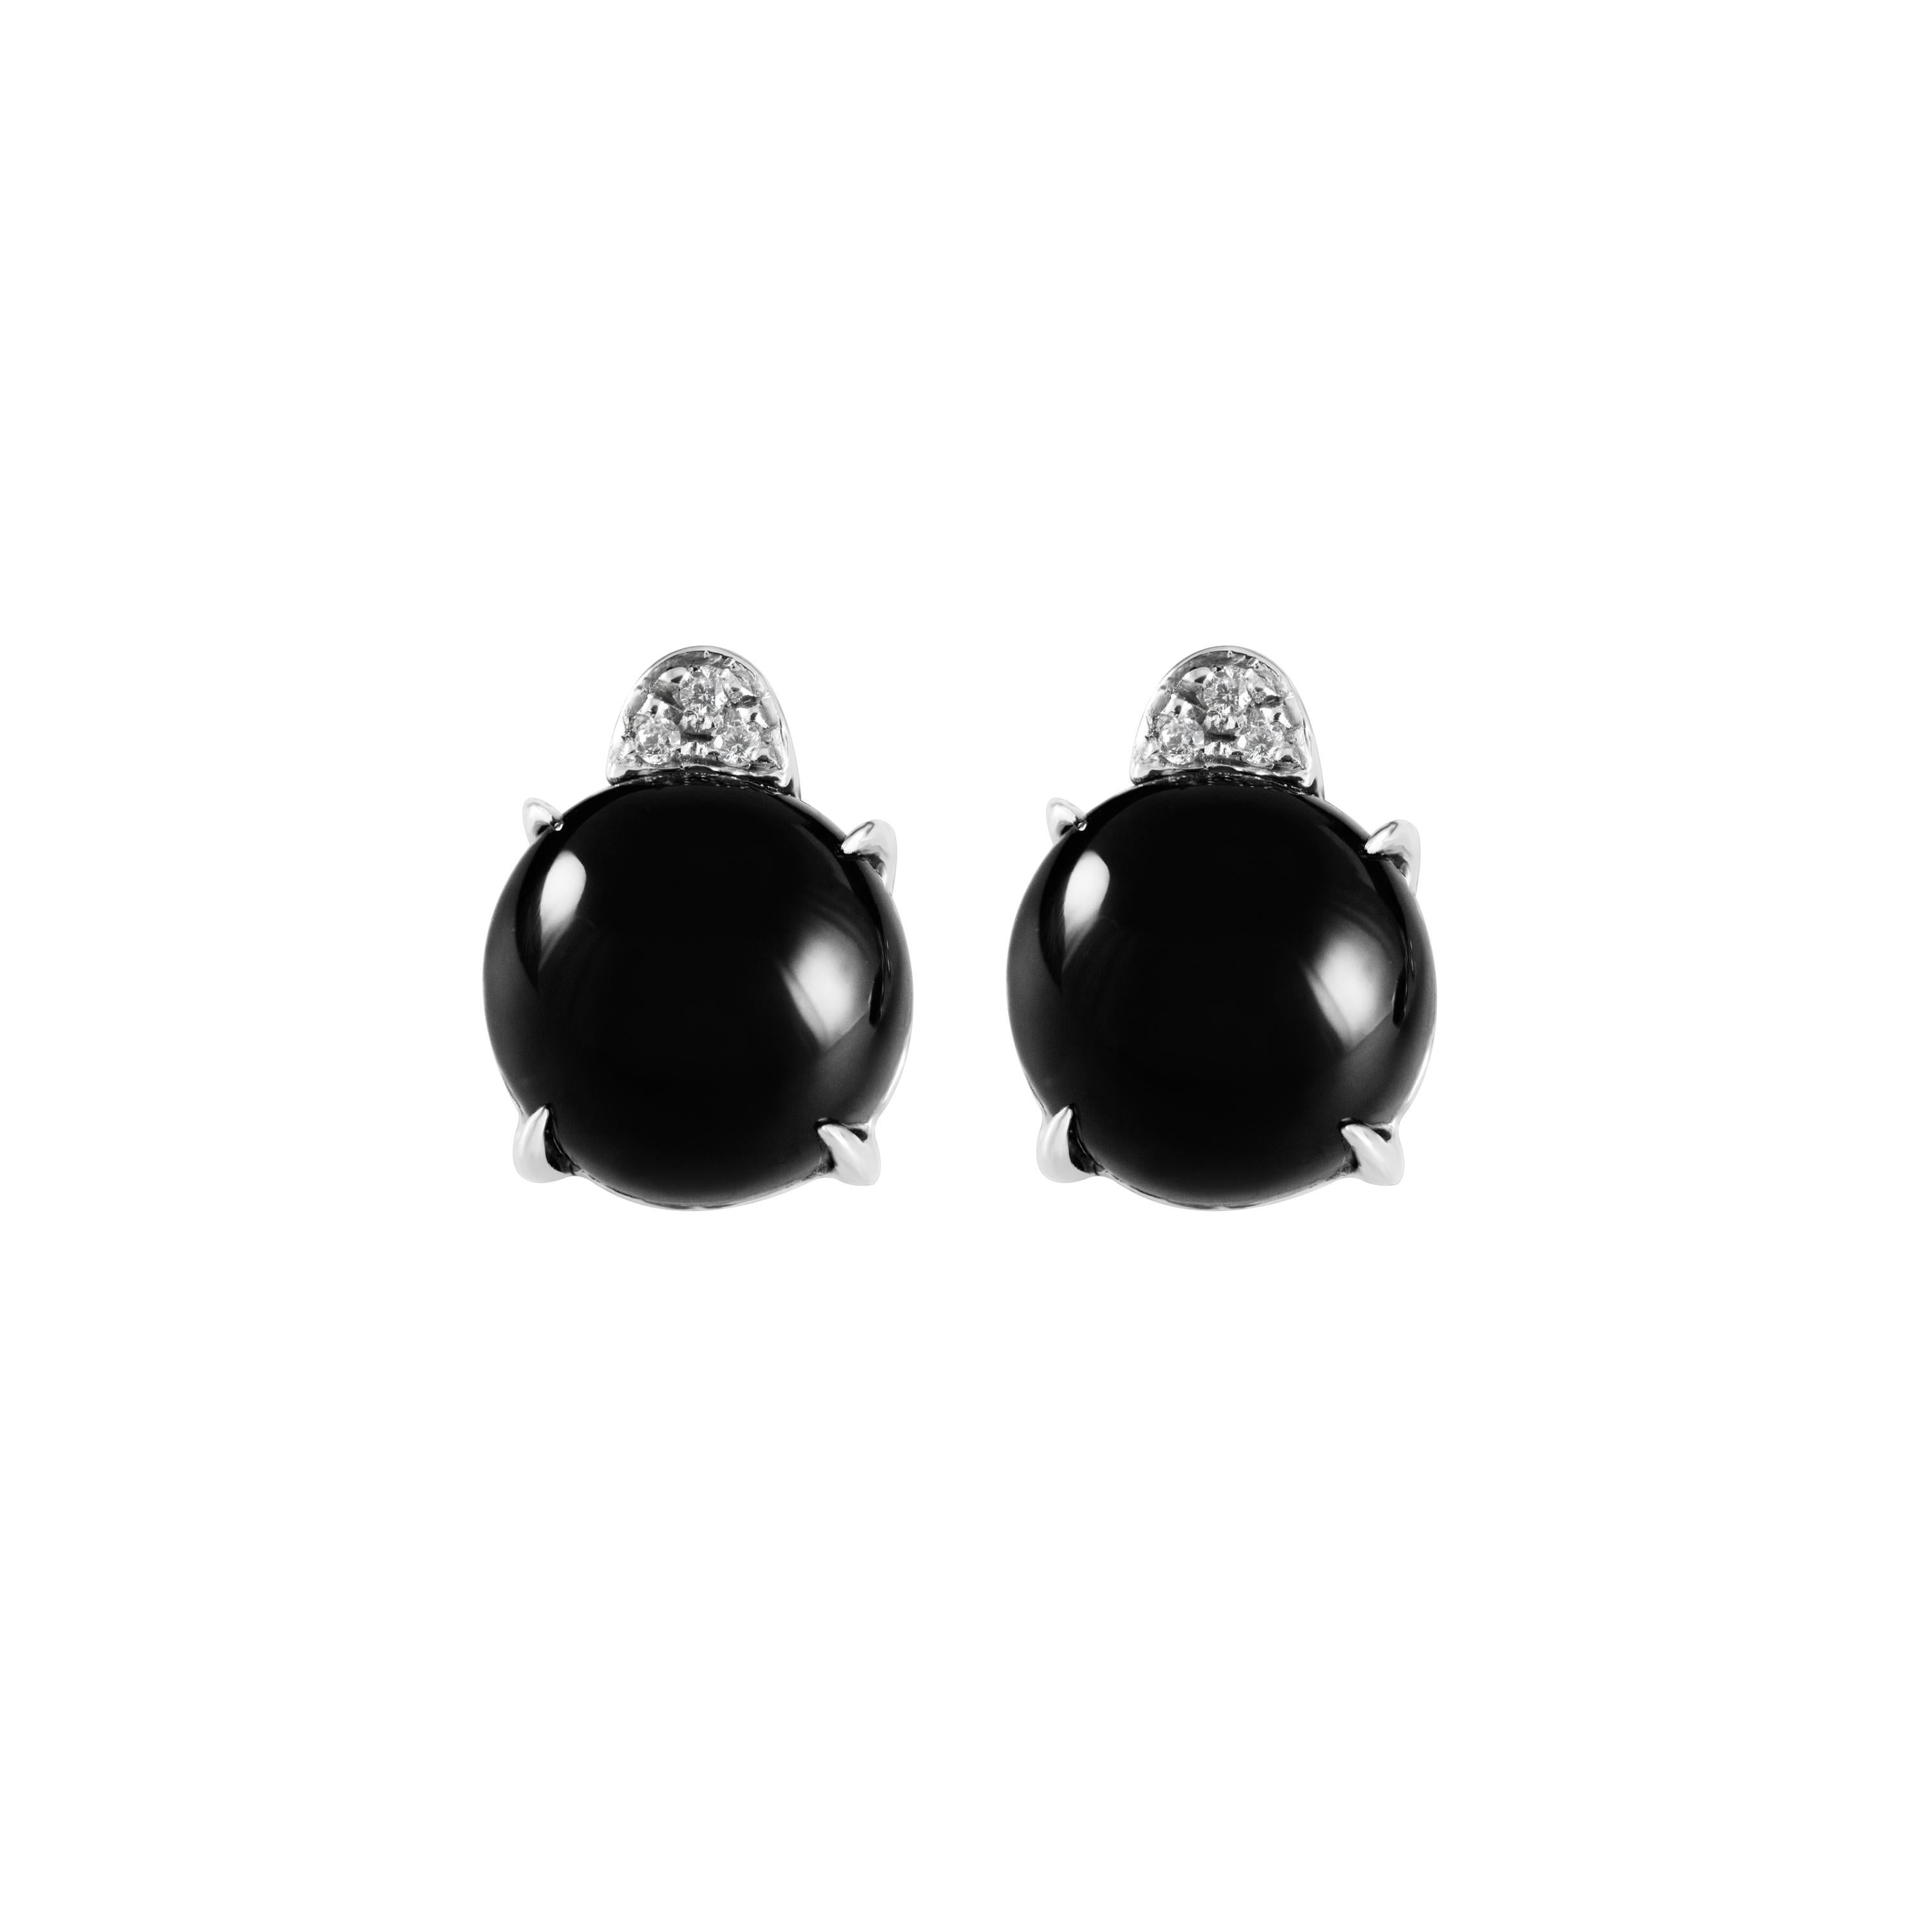 A trio of White VVS-G Diamonds crown two 3ct Cabochon Cut Black Agate Stones set in 18 karat White Gold.

The Black Agate stones have been hand cut in our 150 year old Italian workshop by the Goldsmith. We are also able to offer these stud earrings